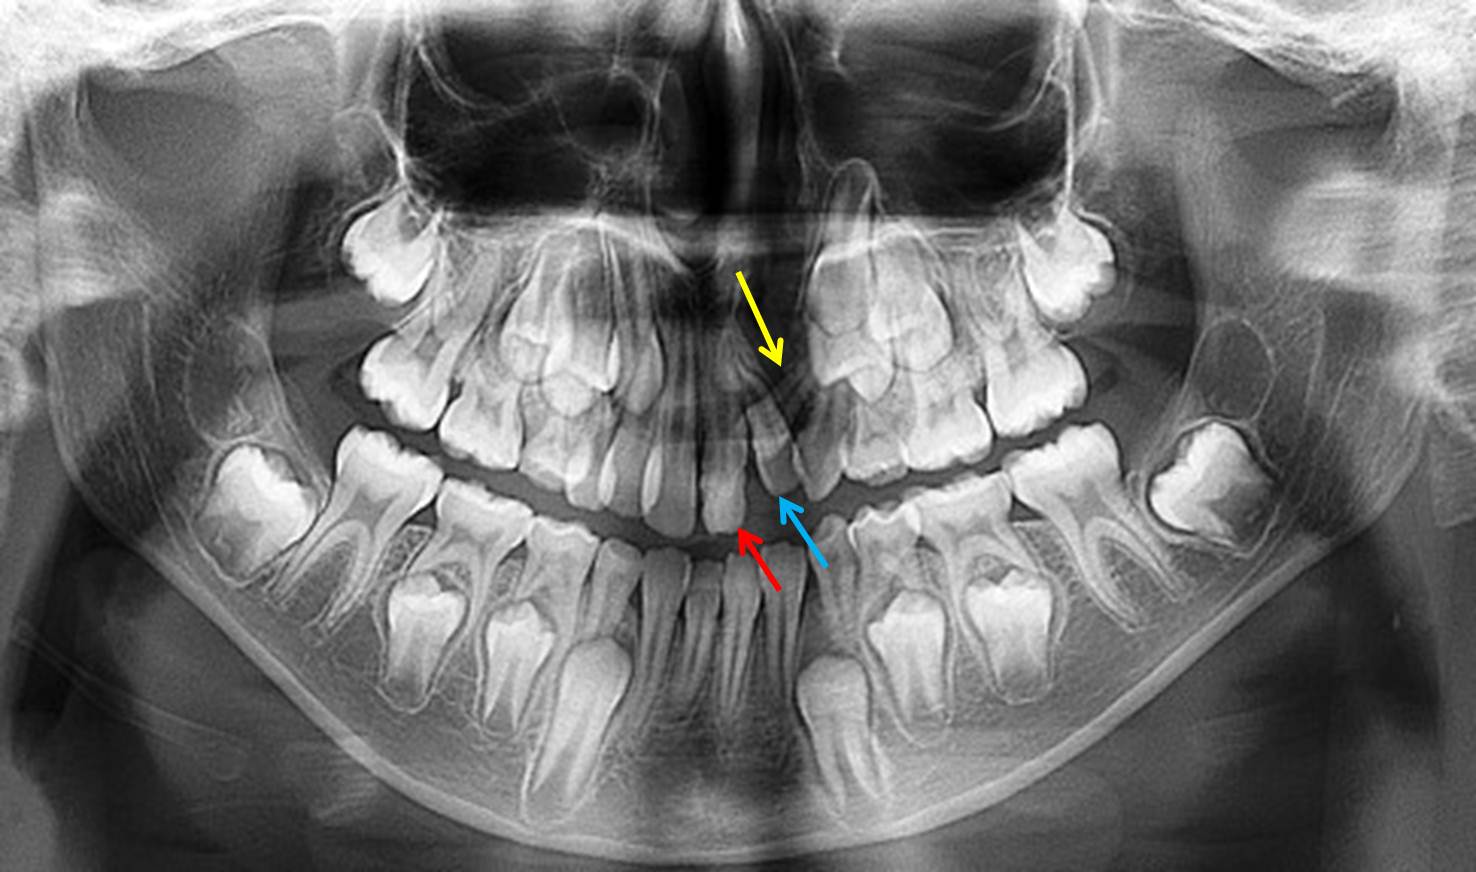 A x-ray of teeth and teeth

Description automatically generated